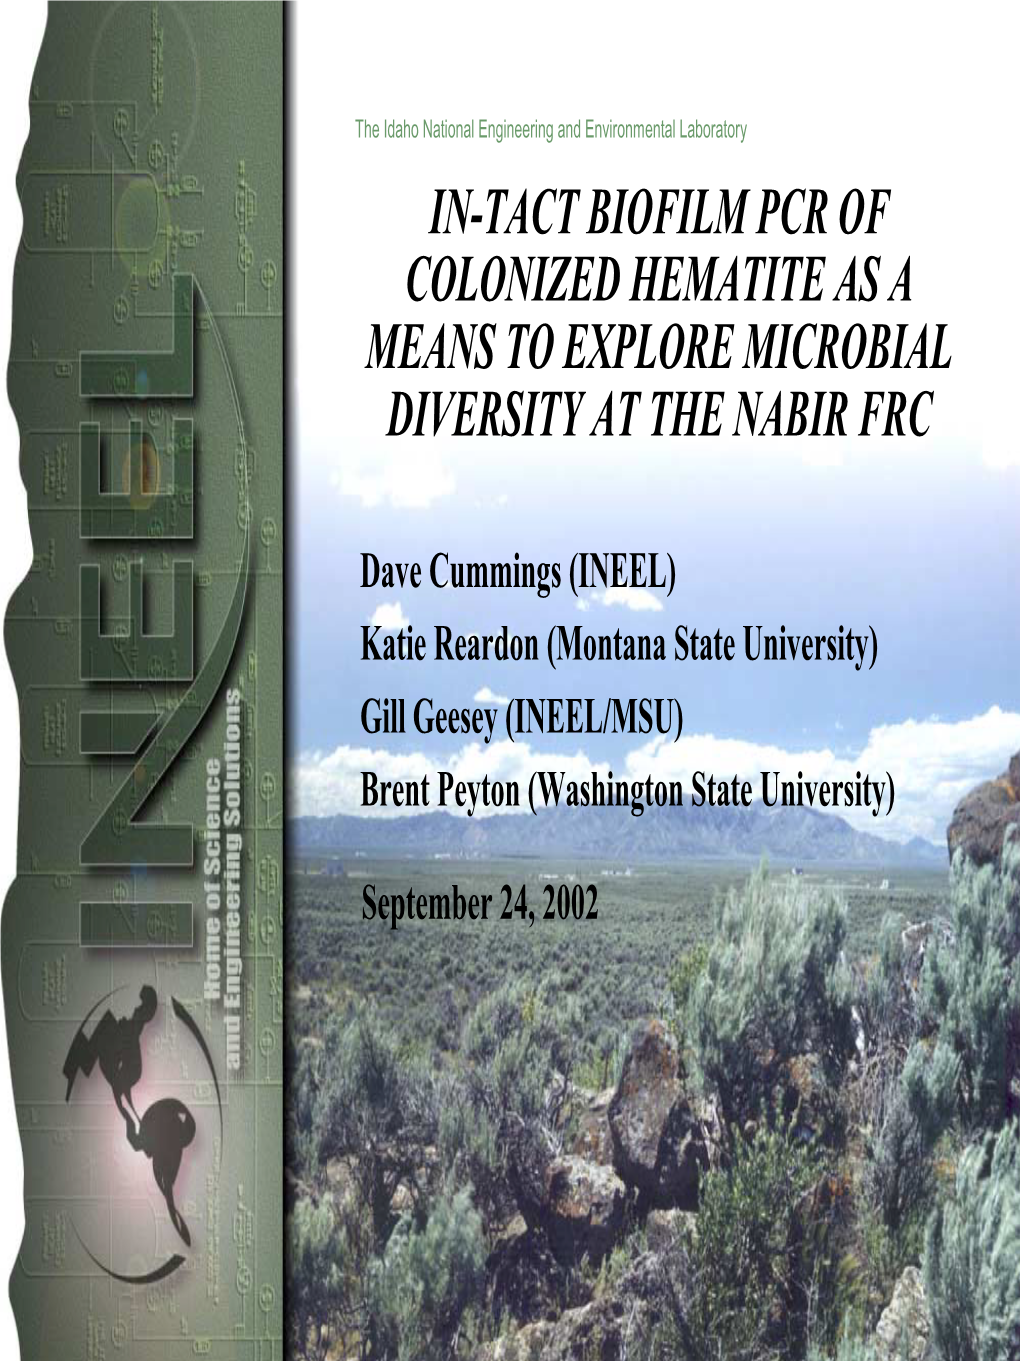 In-Tact Biofilm Pcr of Colonized Hematite As a Means to Explore Microbial Diversity at the Nabir Frc